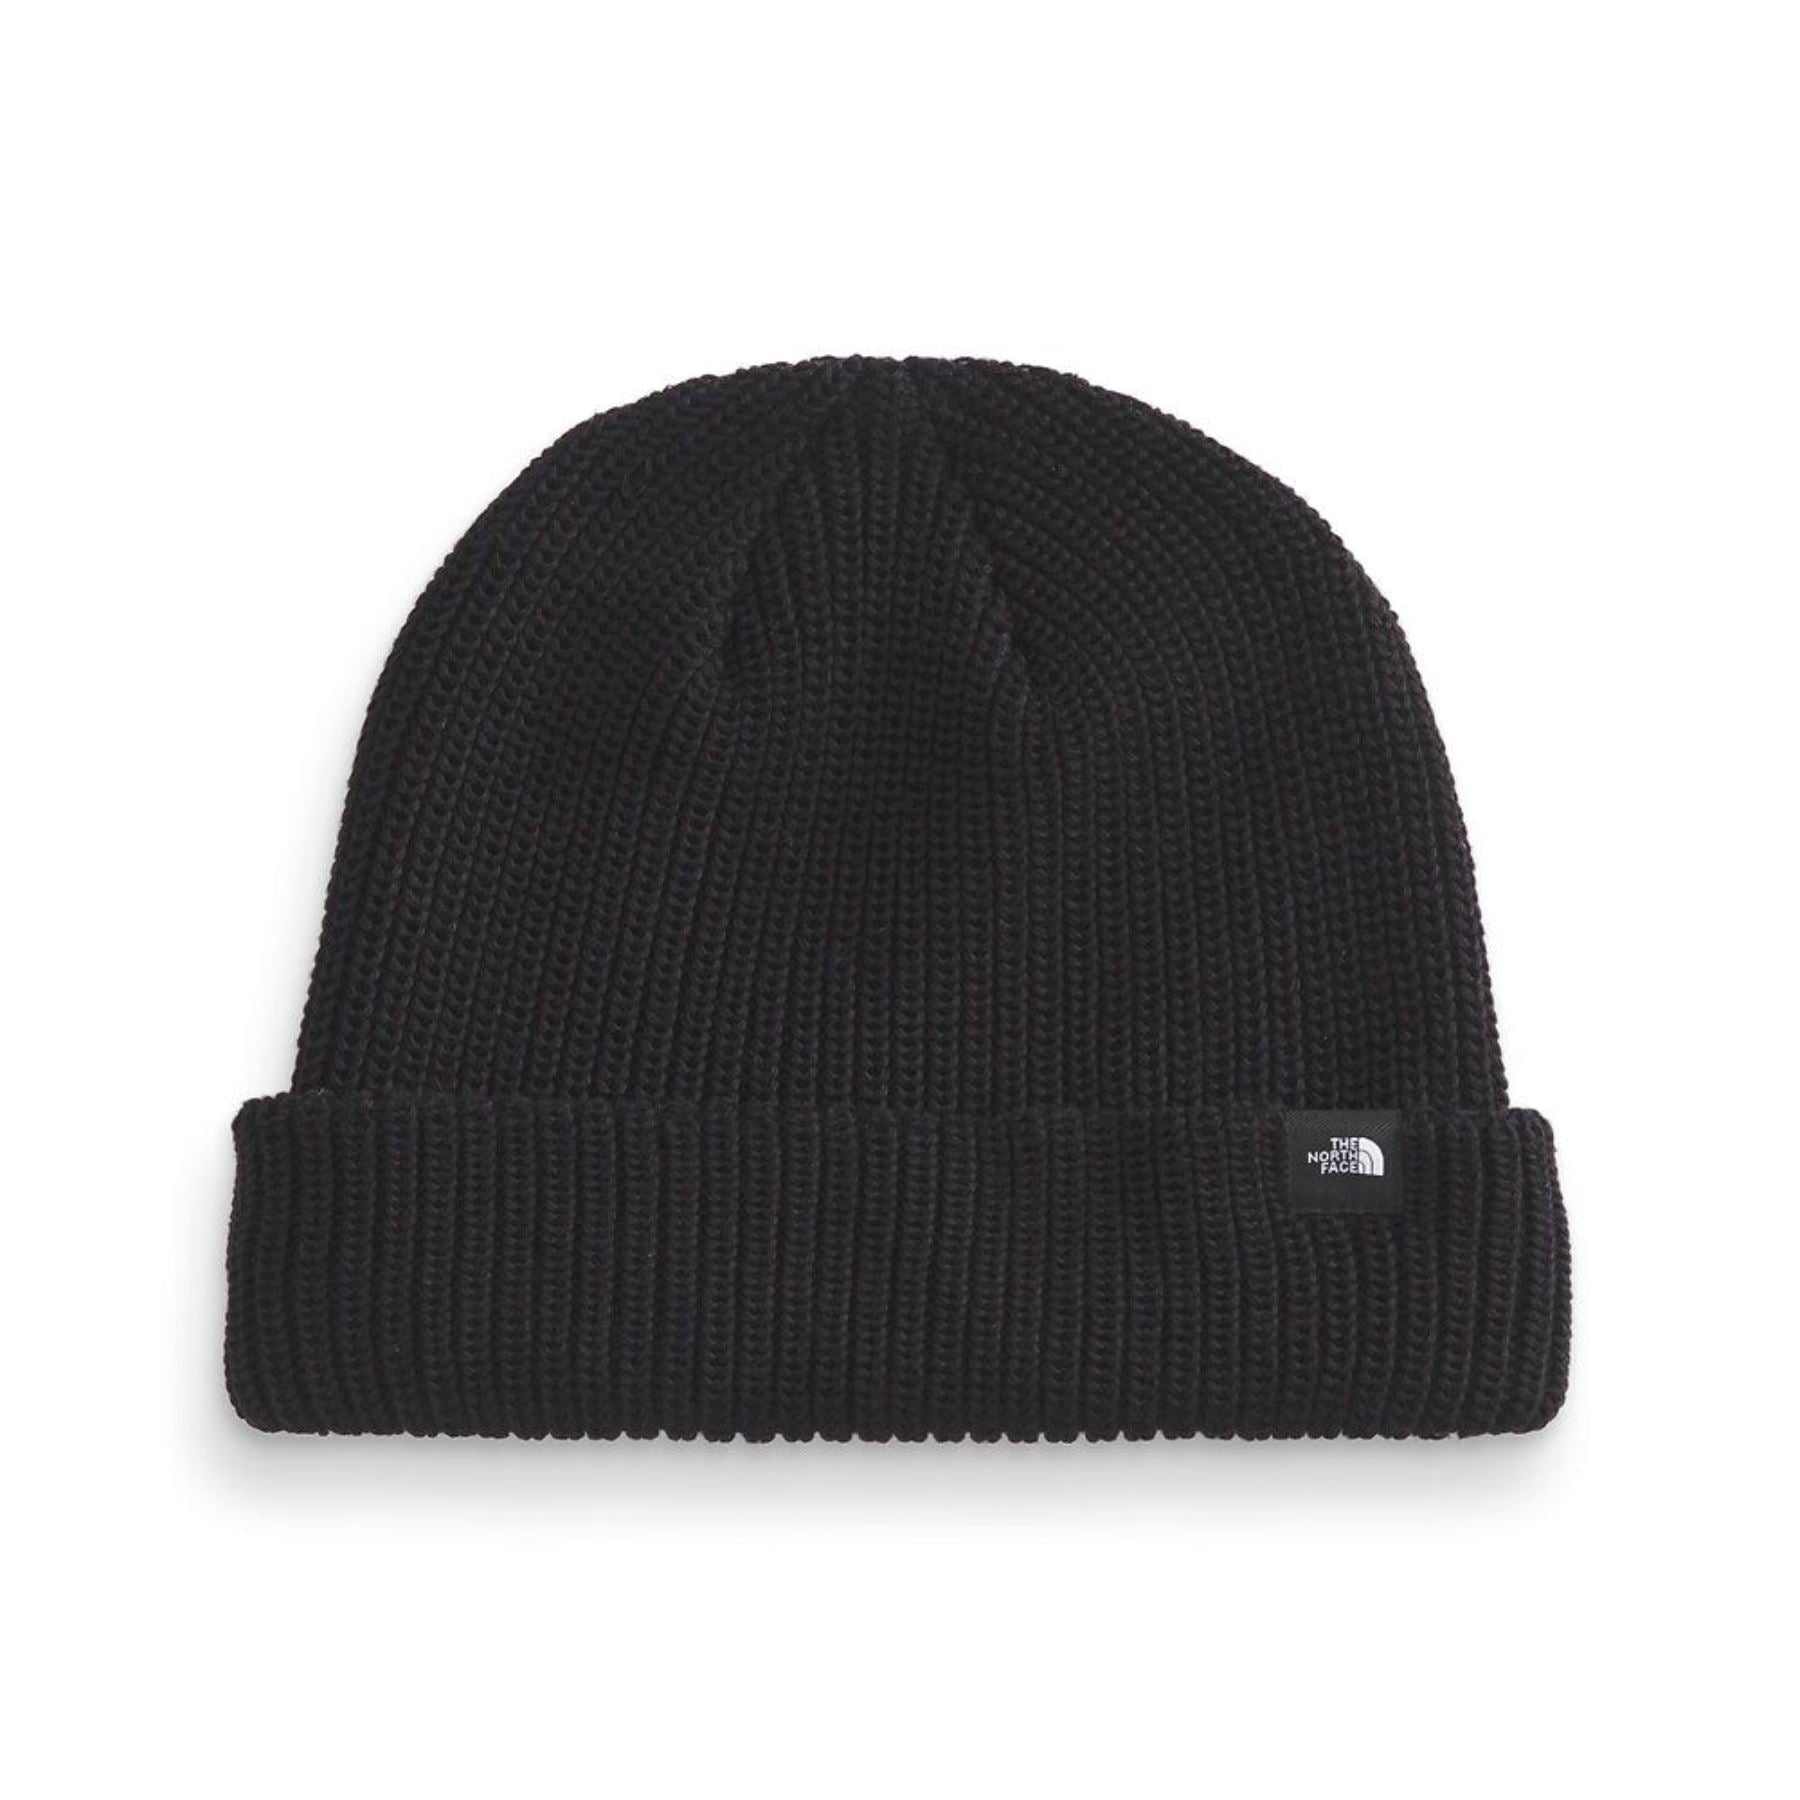 The North Face Fisherman Beanie - Black Beanies The North Face 